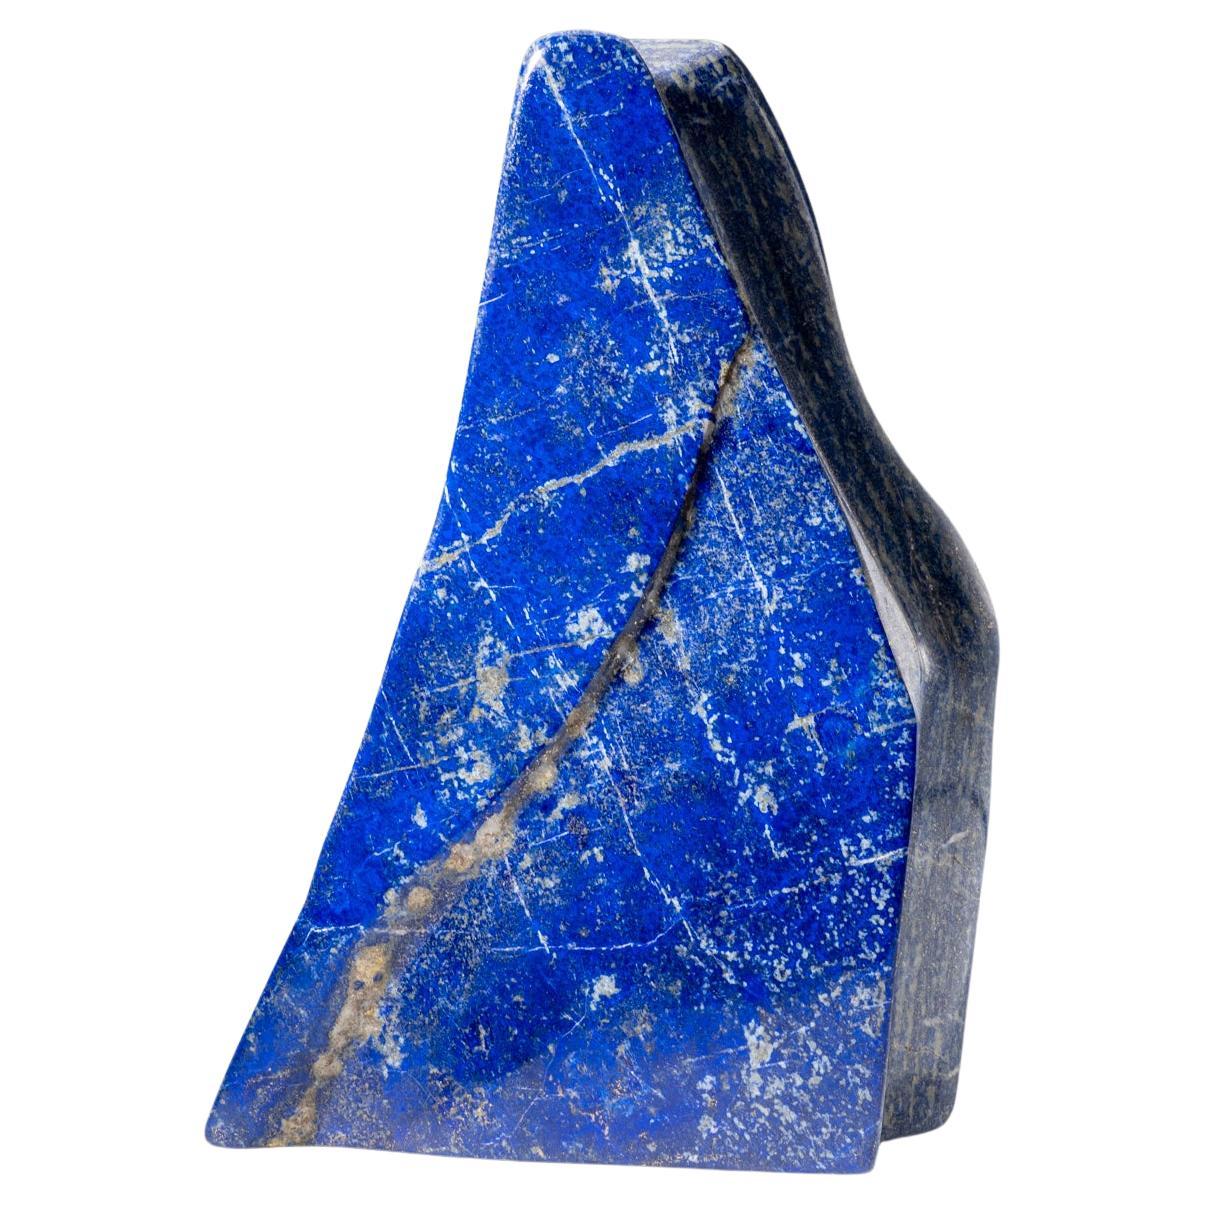 Polished Lapis Lazuli Freeform from Afghanistan (7.4 lbs) For Sale